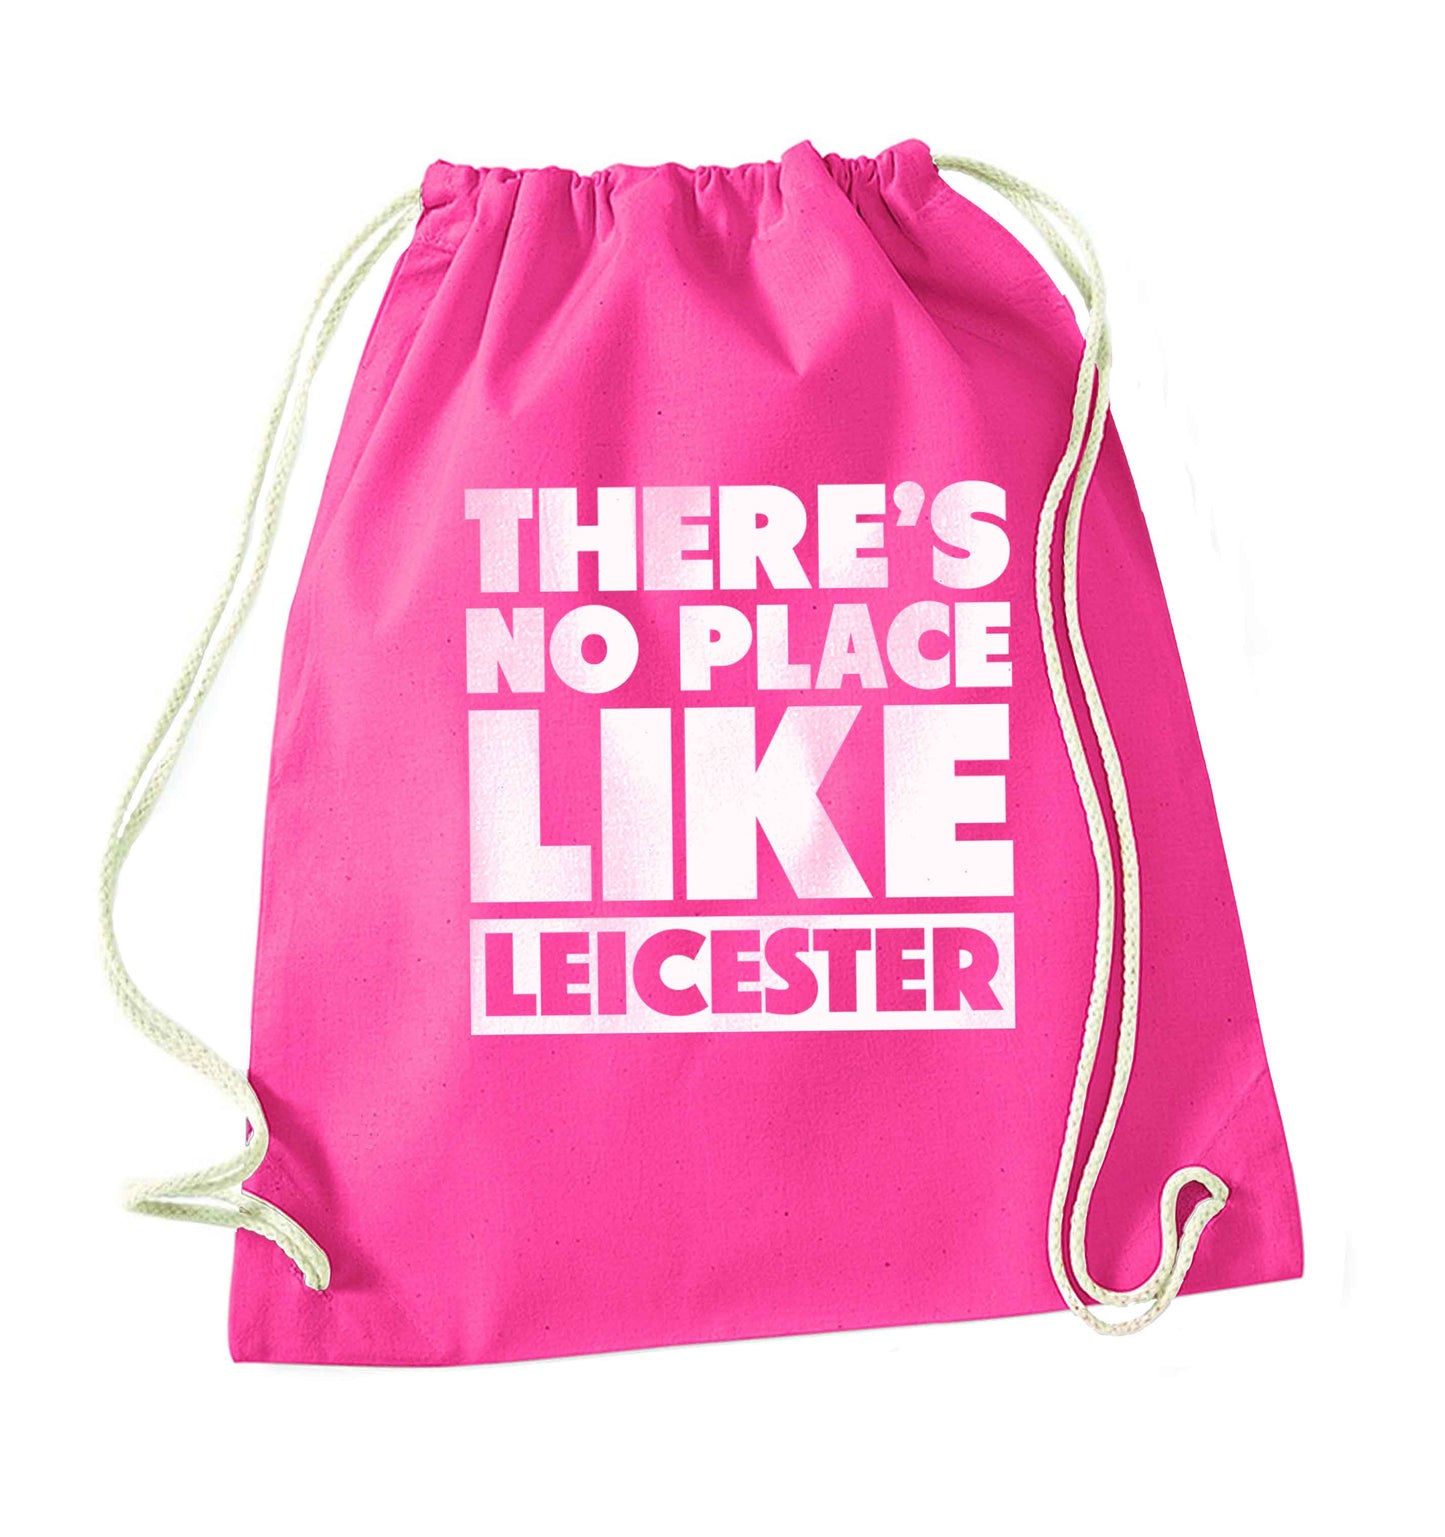 There's no place like Leicester pink drawstring bag